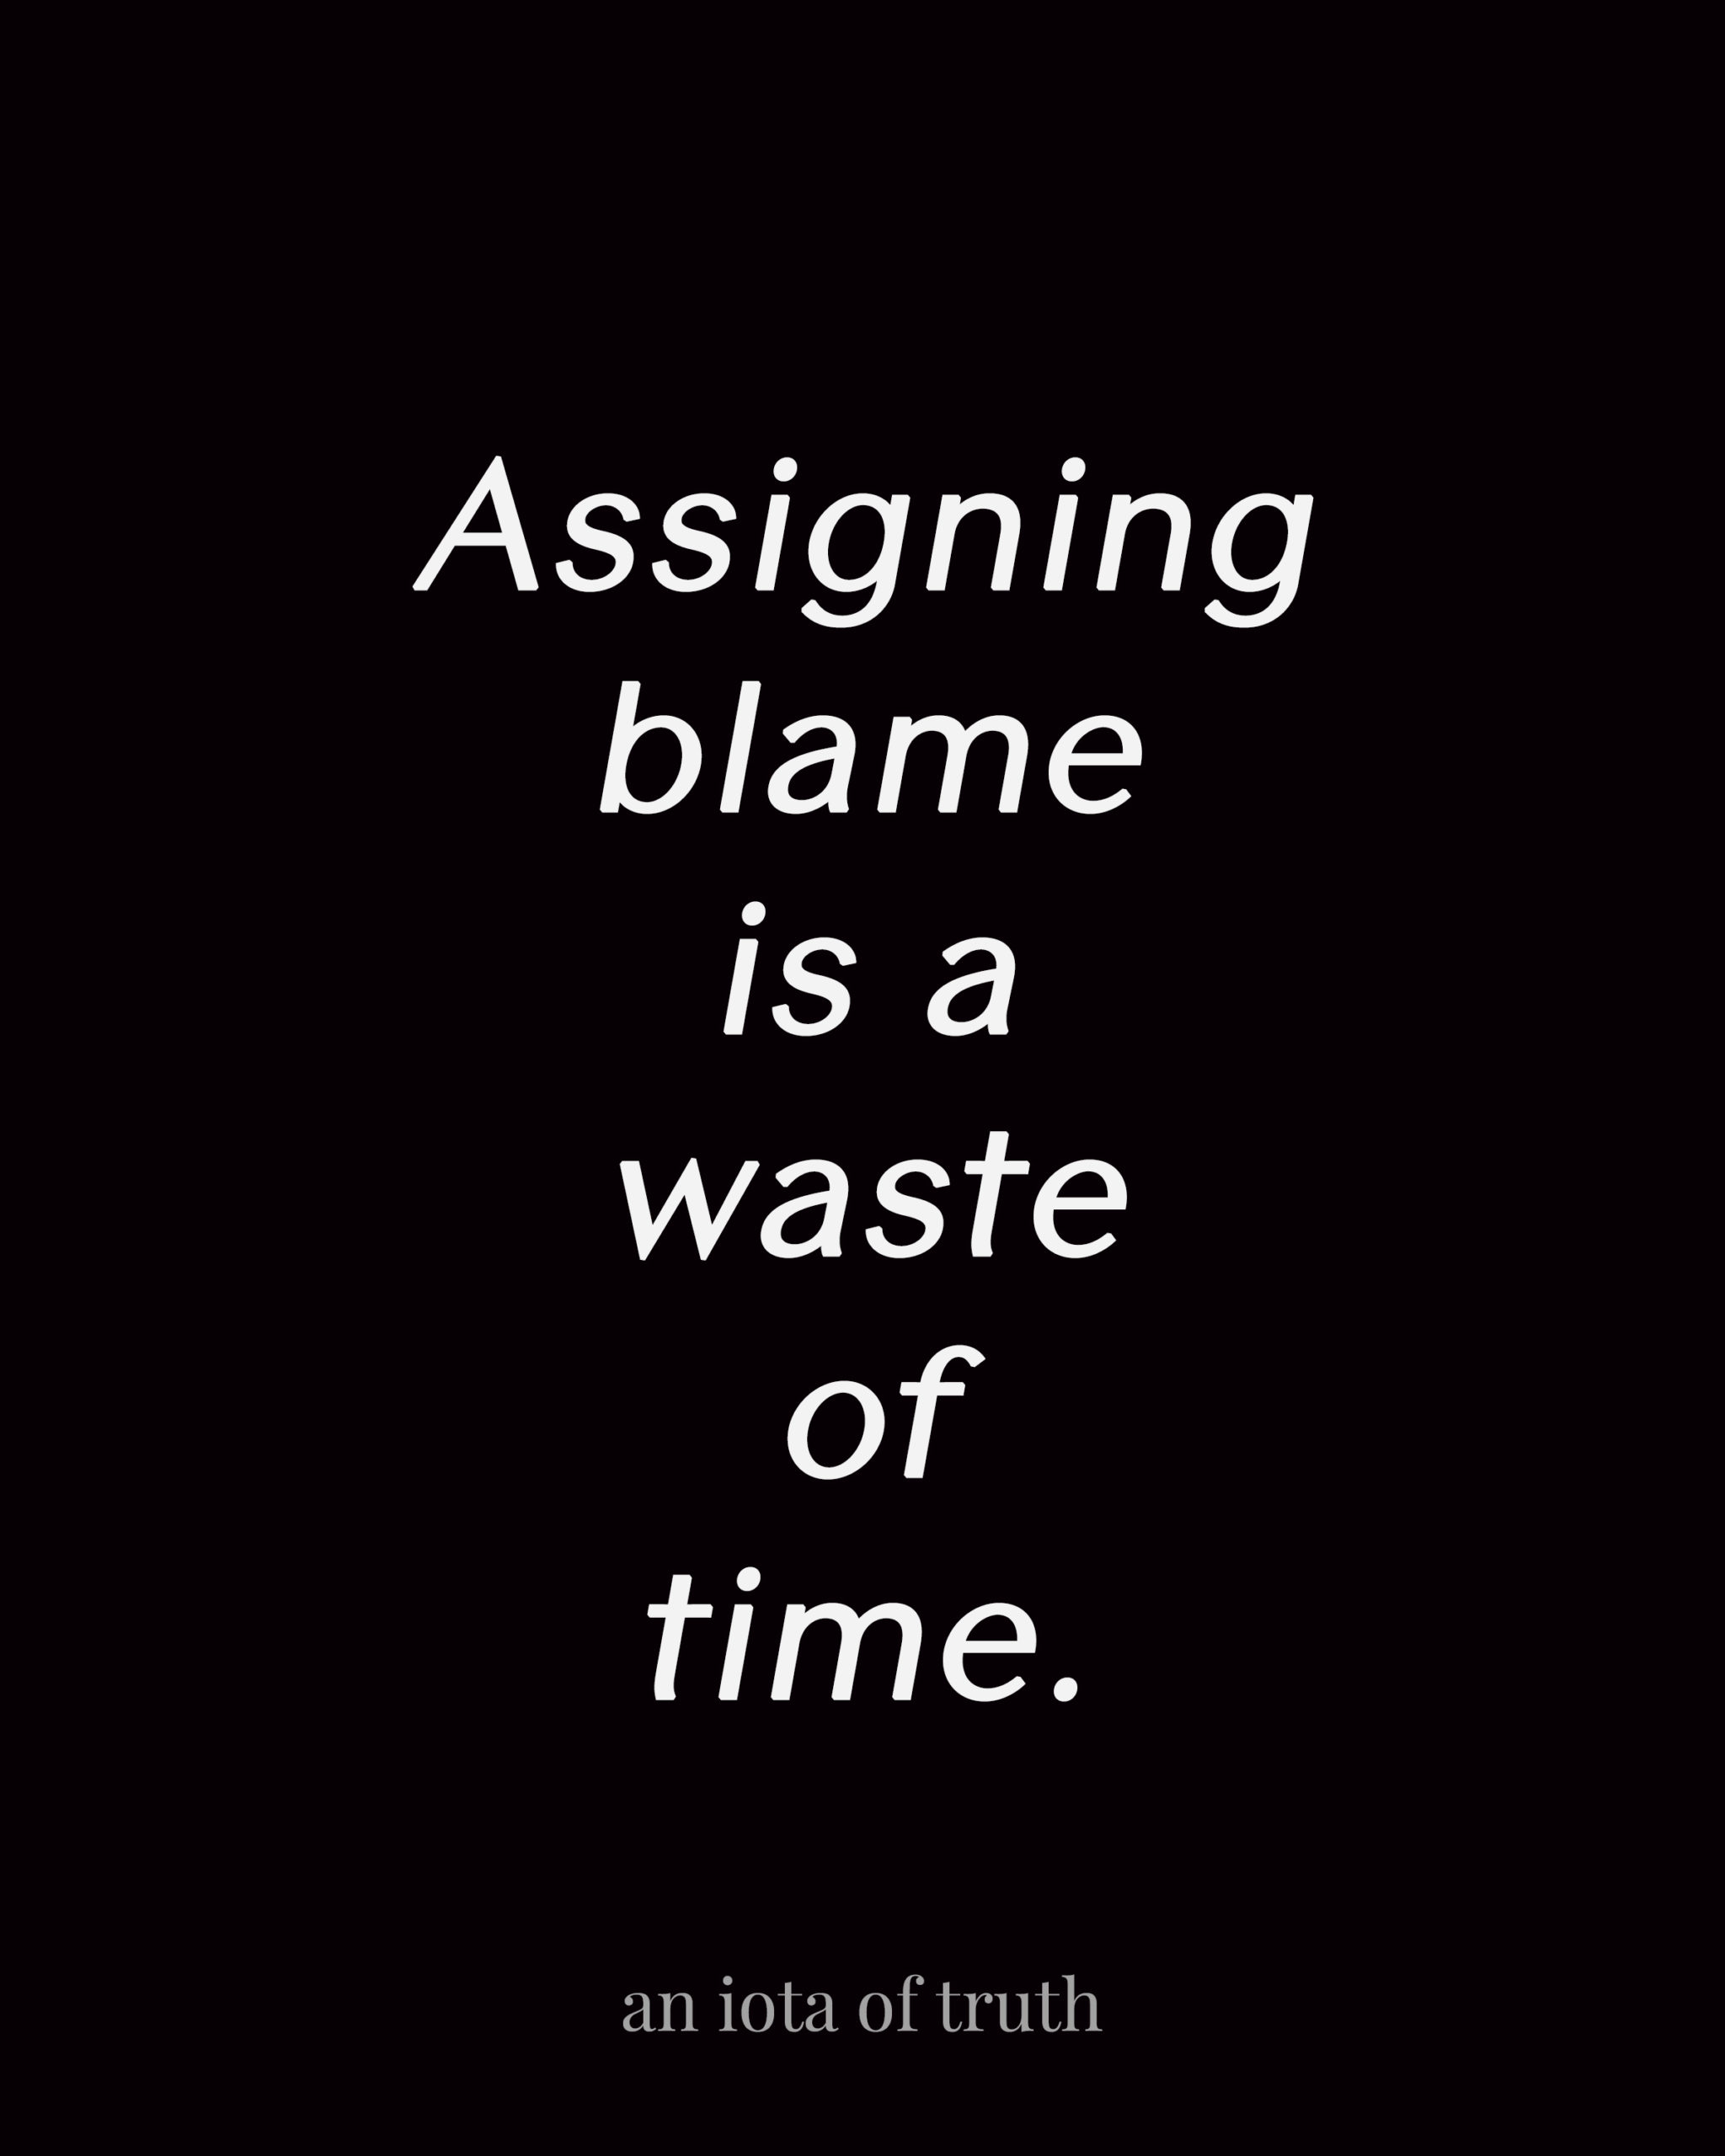 Assigning blame is a waste of time.